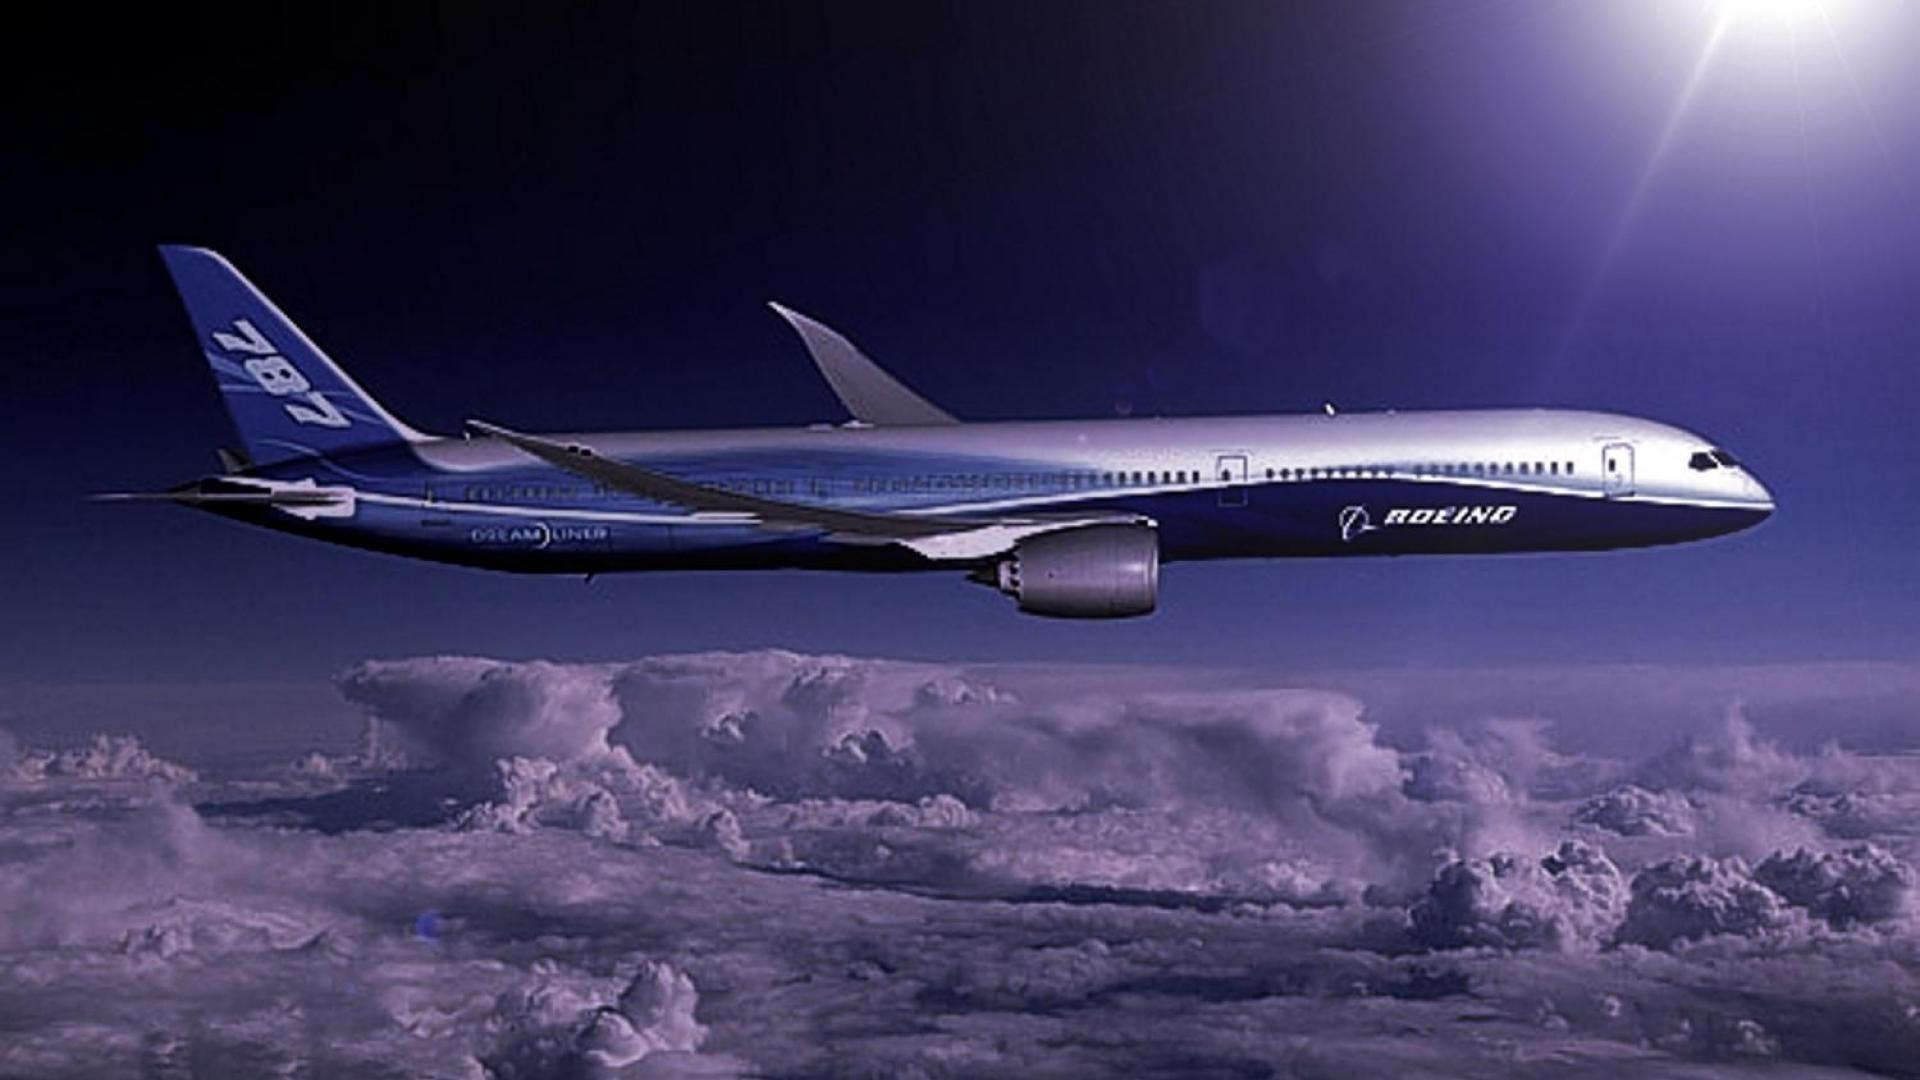 Wallpaper Aircraft Airplane Boeing 767 Boeing Co Runway Background   Download Free Image